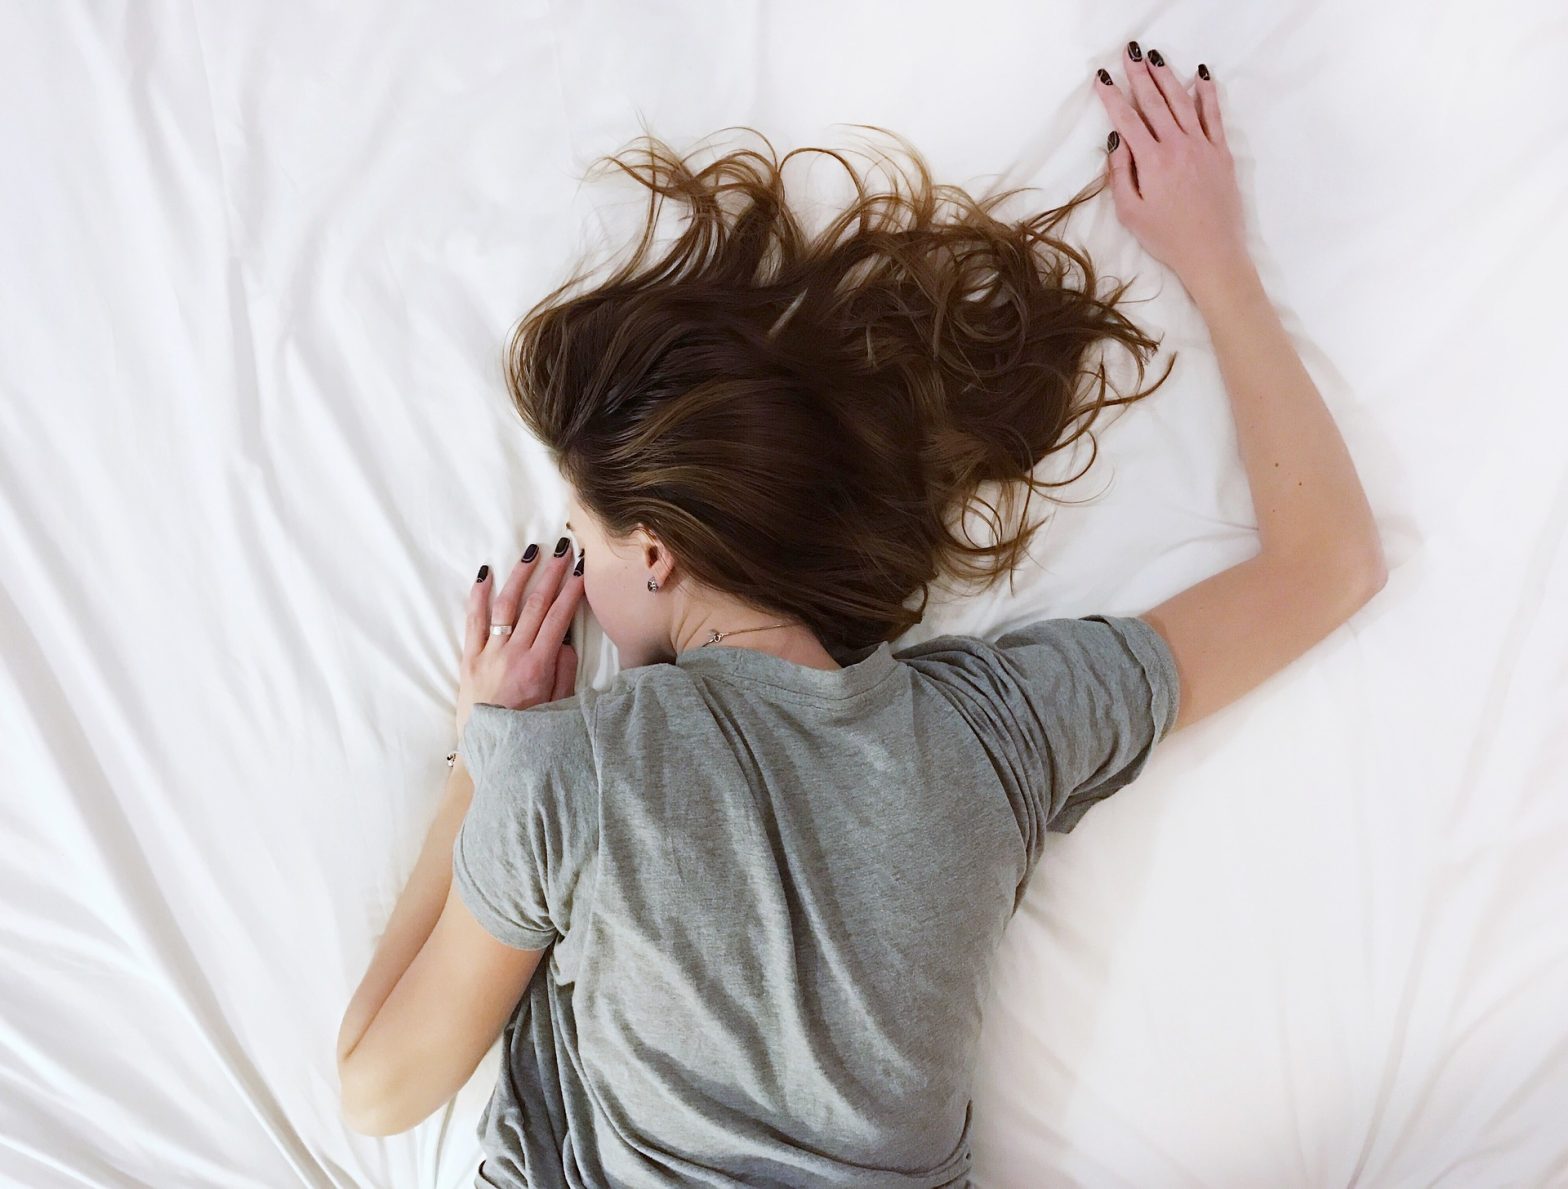 Woman in grey tshirt sleeping on white bed sheets